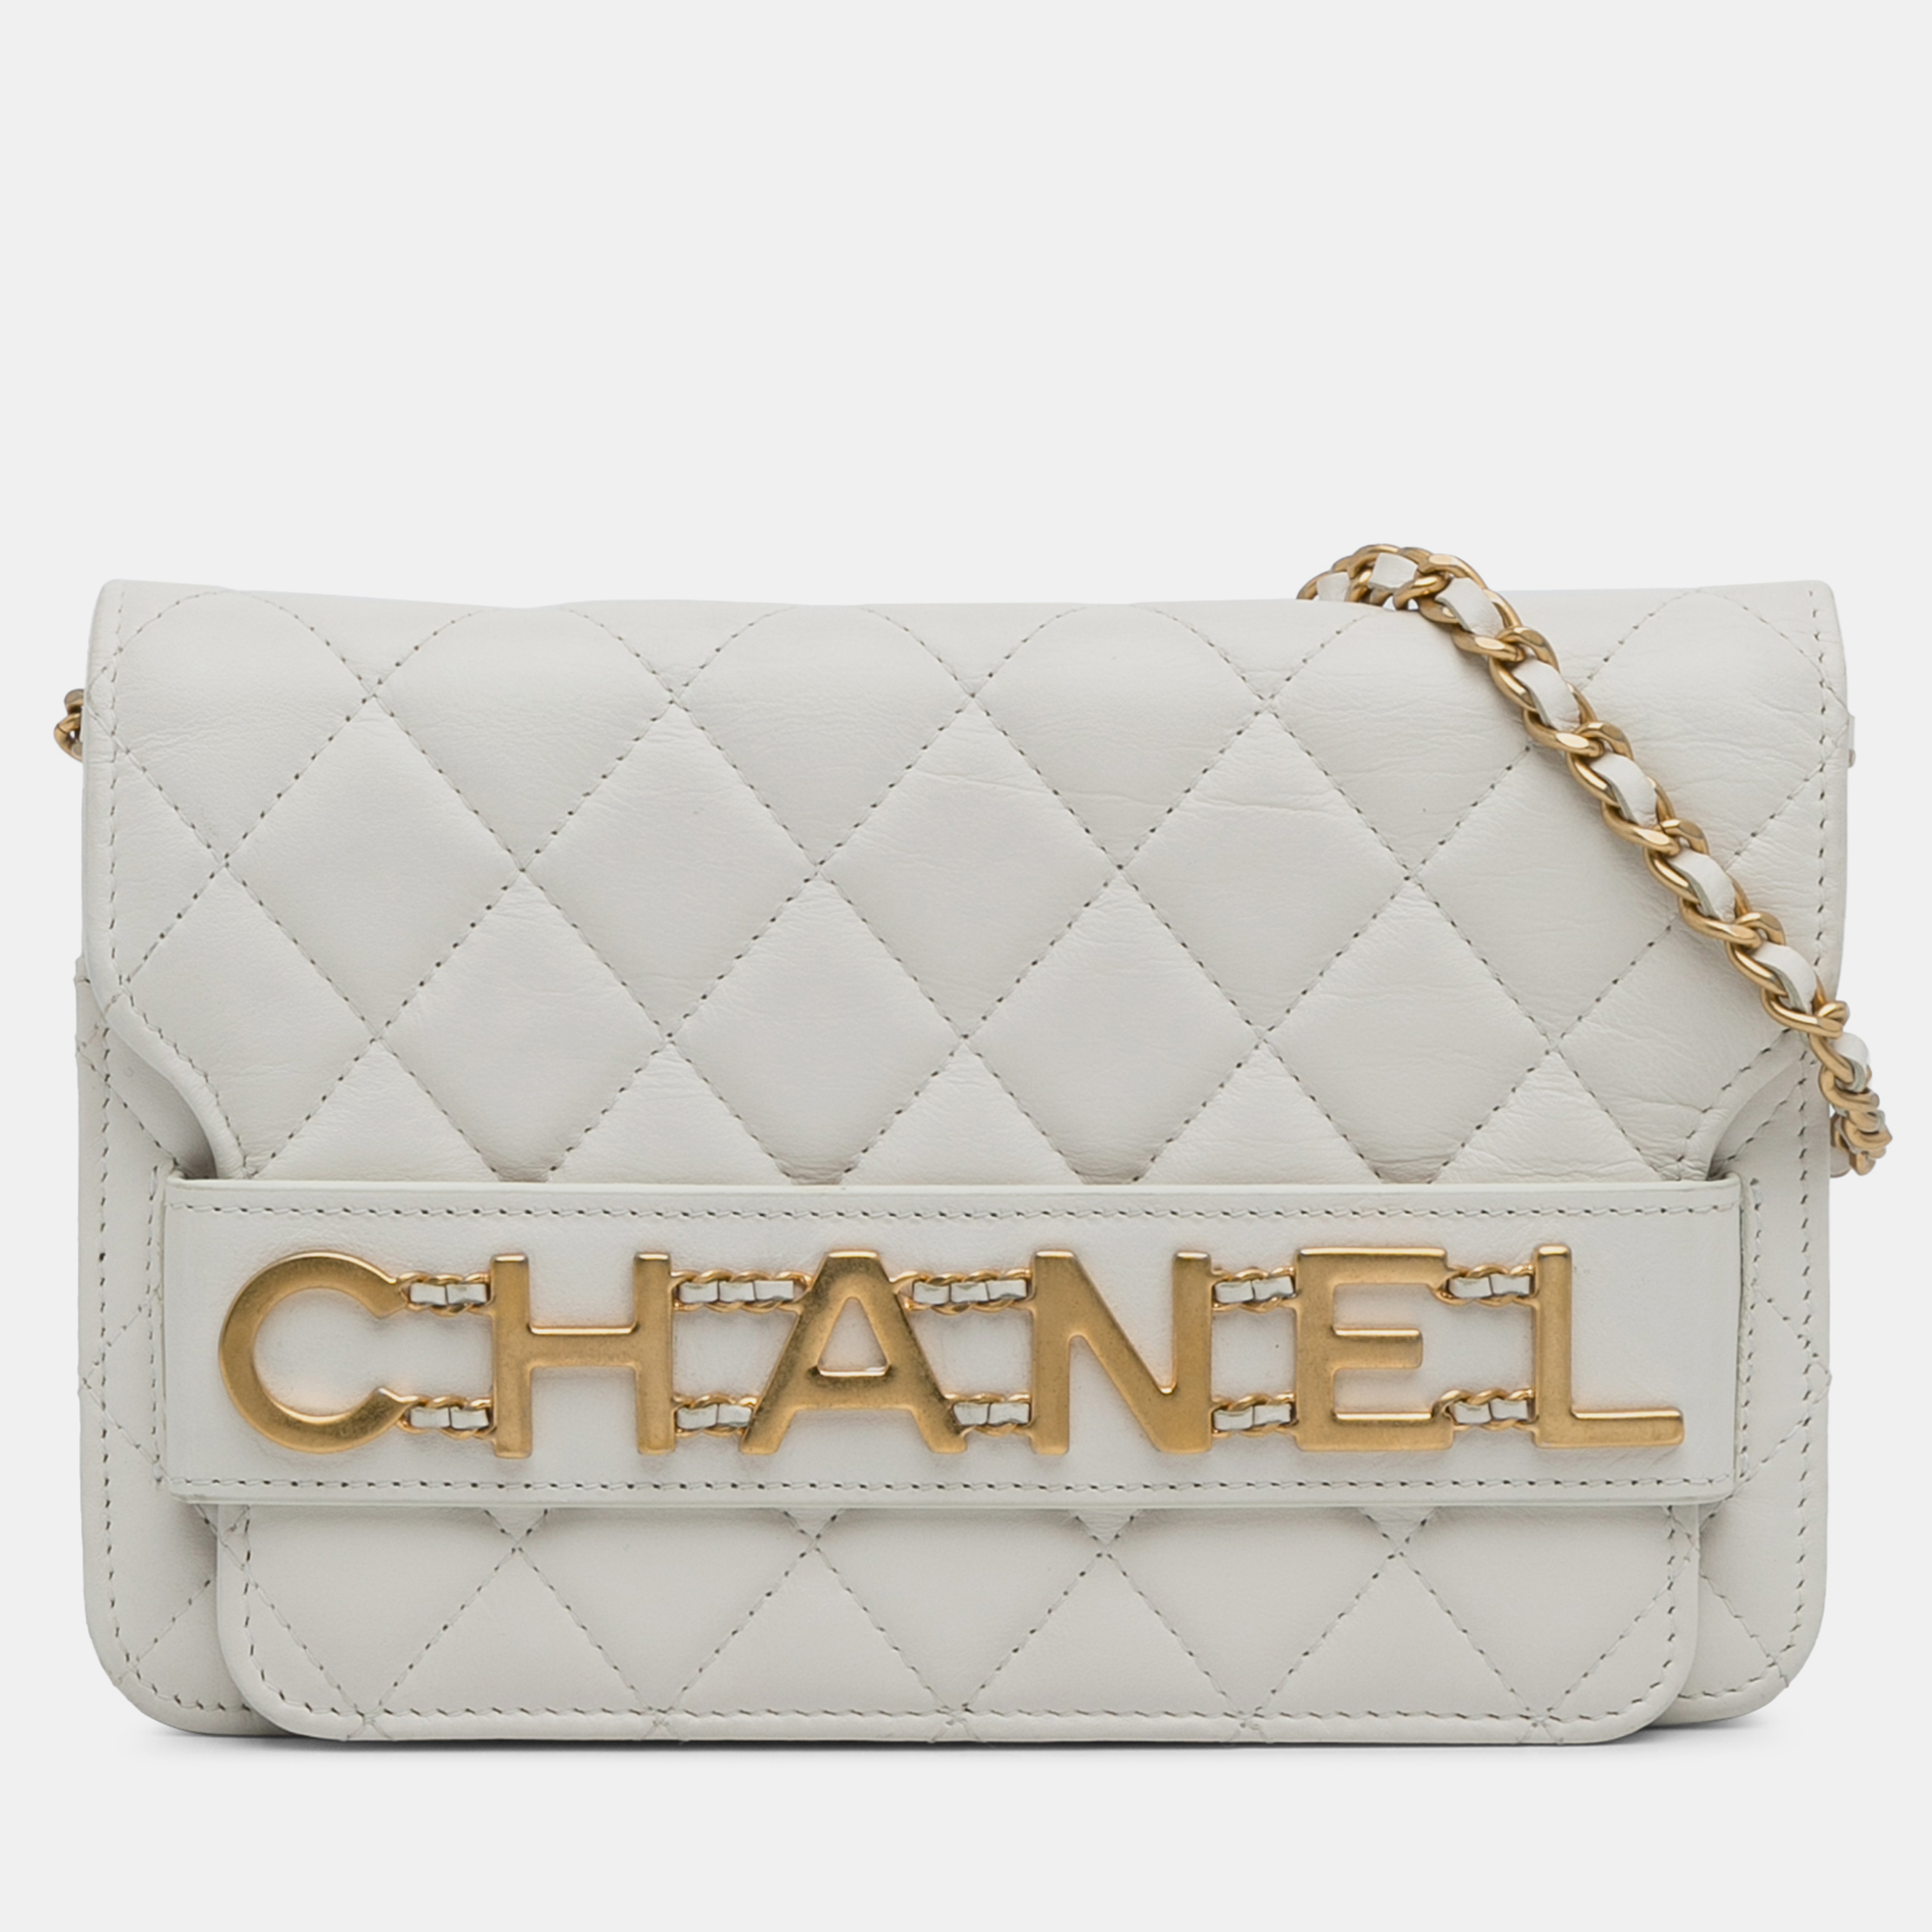 Chanel enchained flap wallet on chain